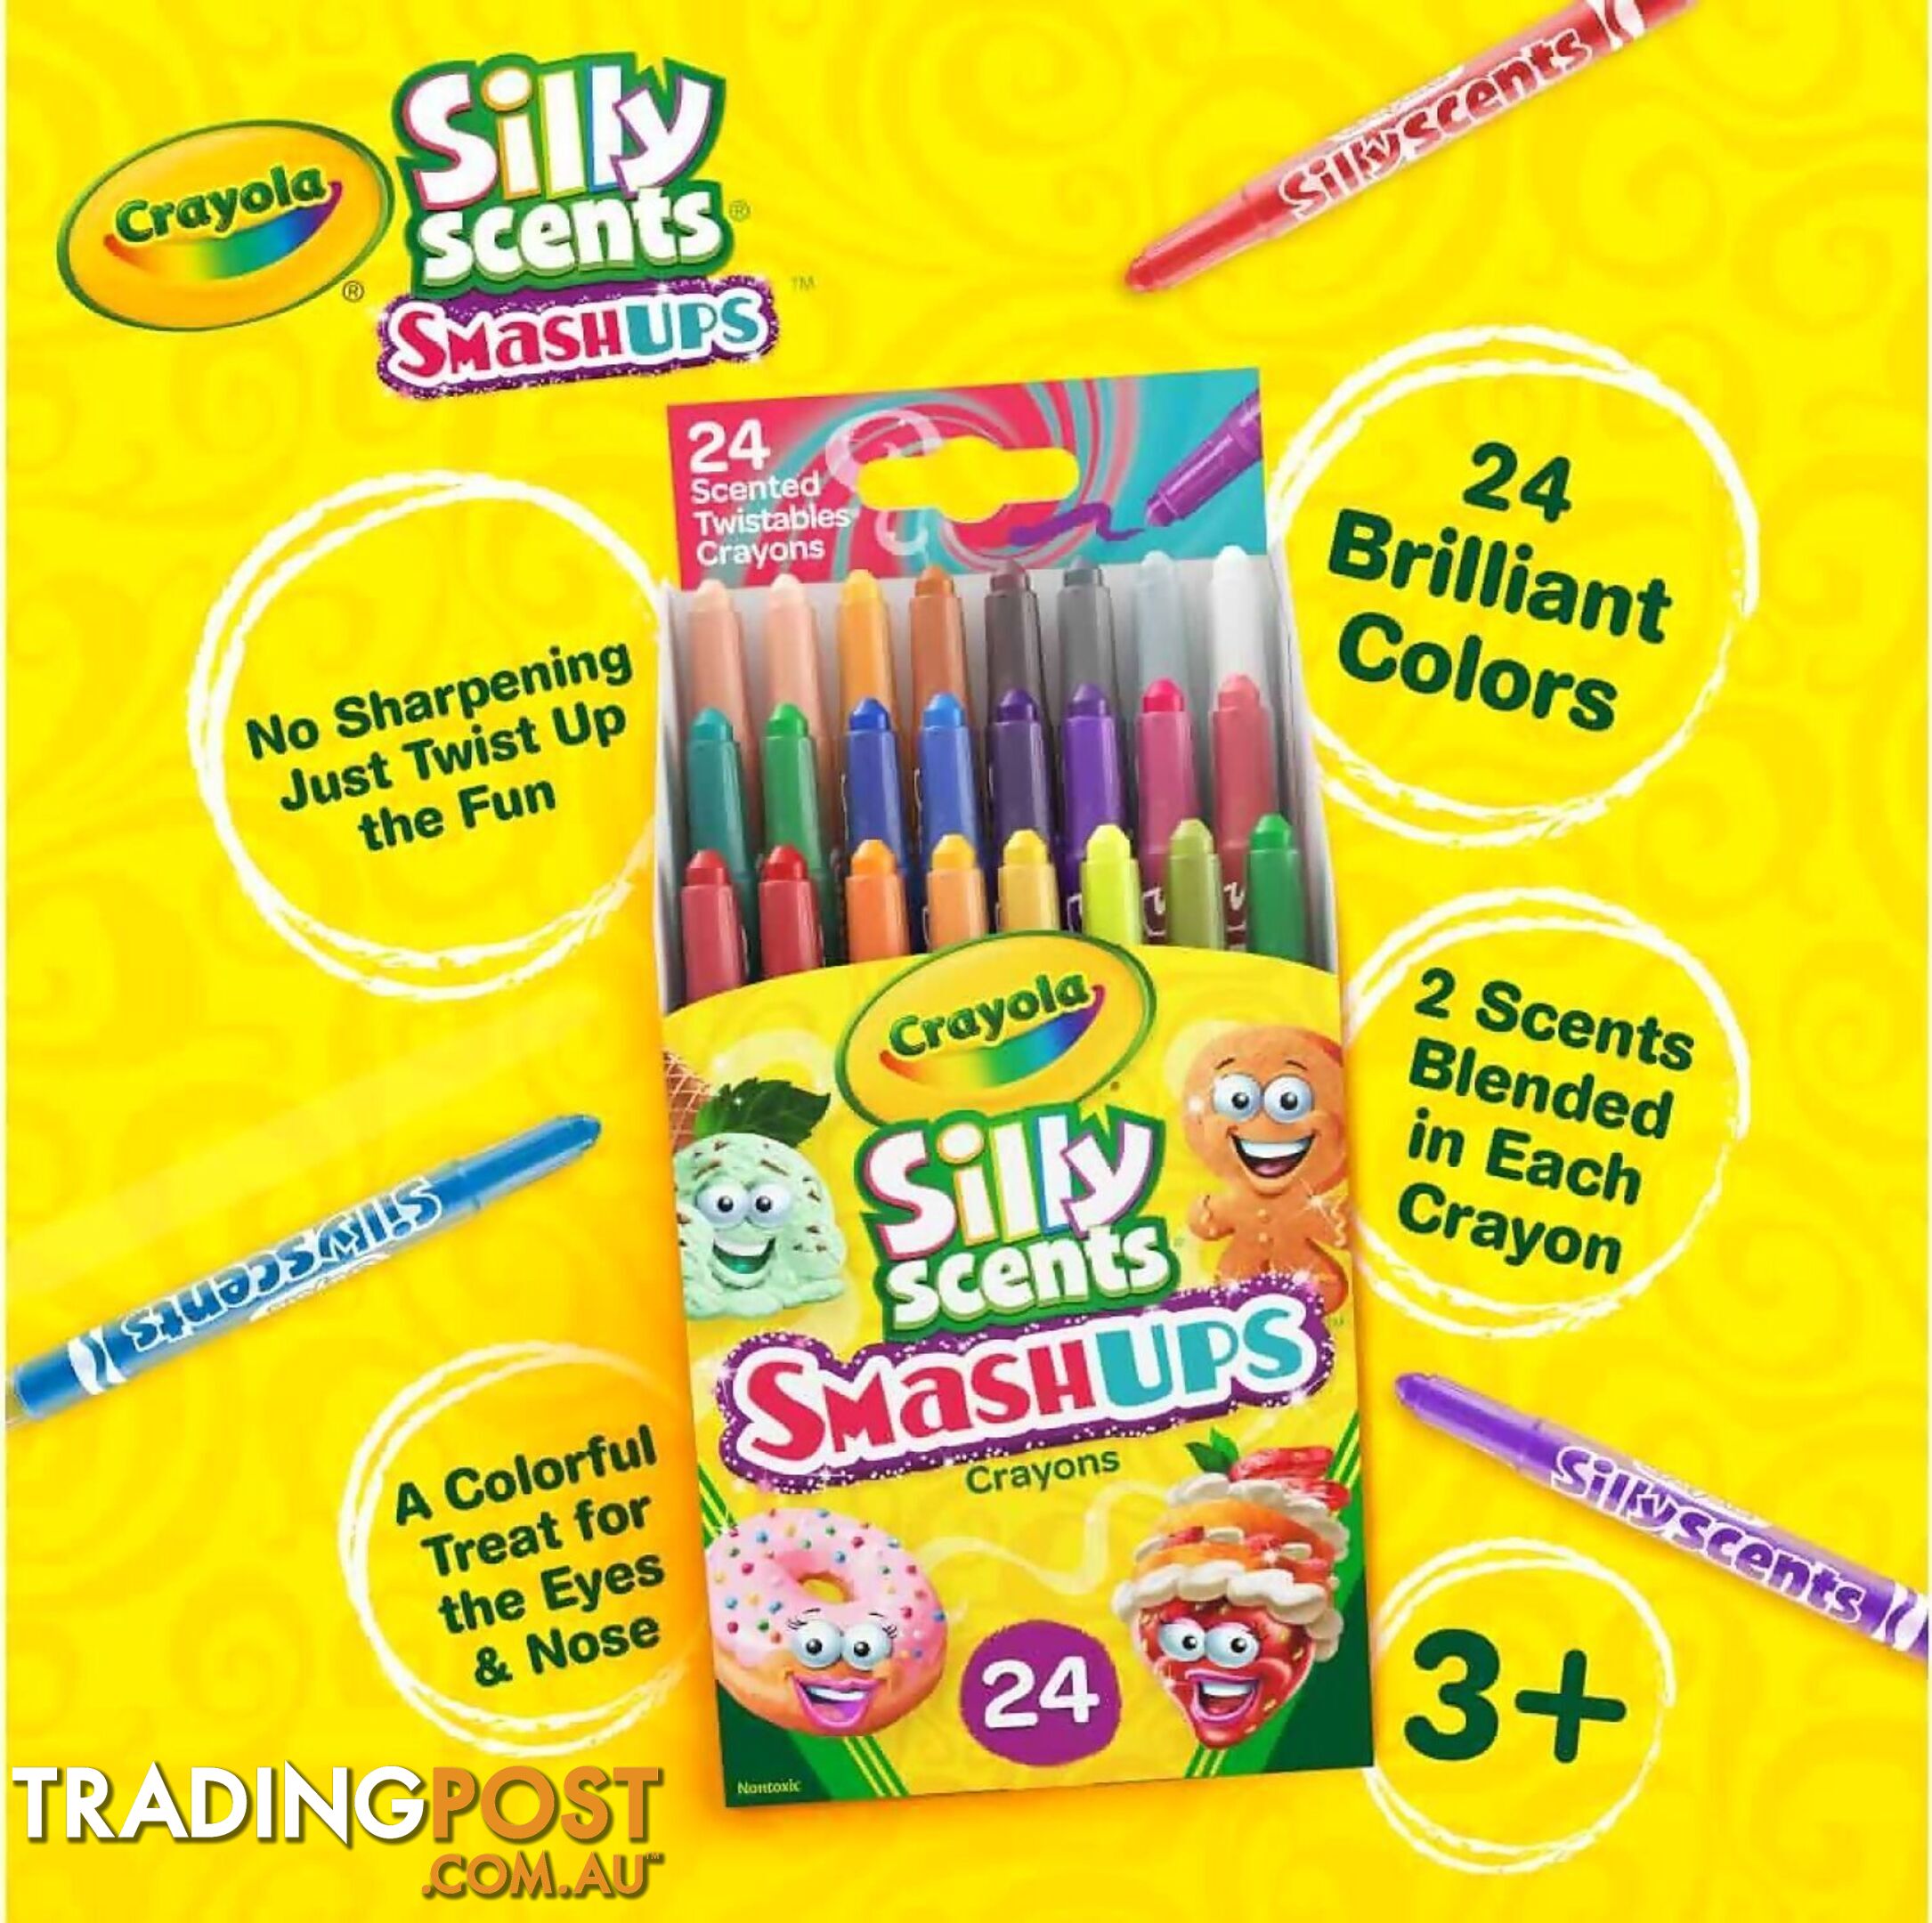 Crayola - Silly Scents Smash Ups Twistables Scented Crayons 24 Count - Bs523470 - 071662034702